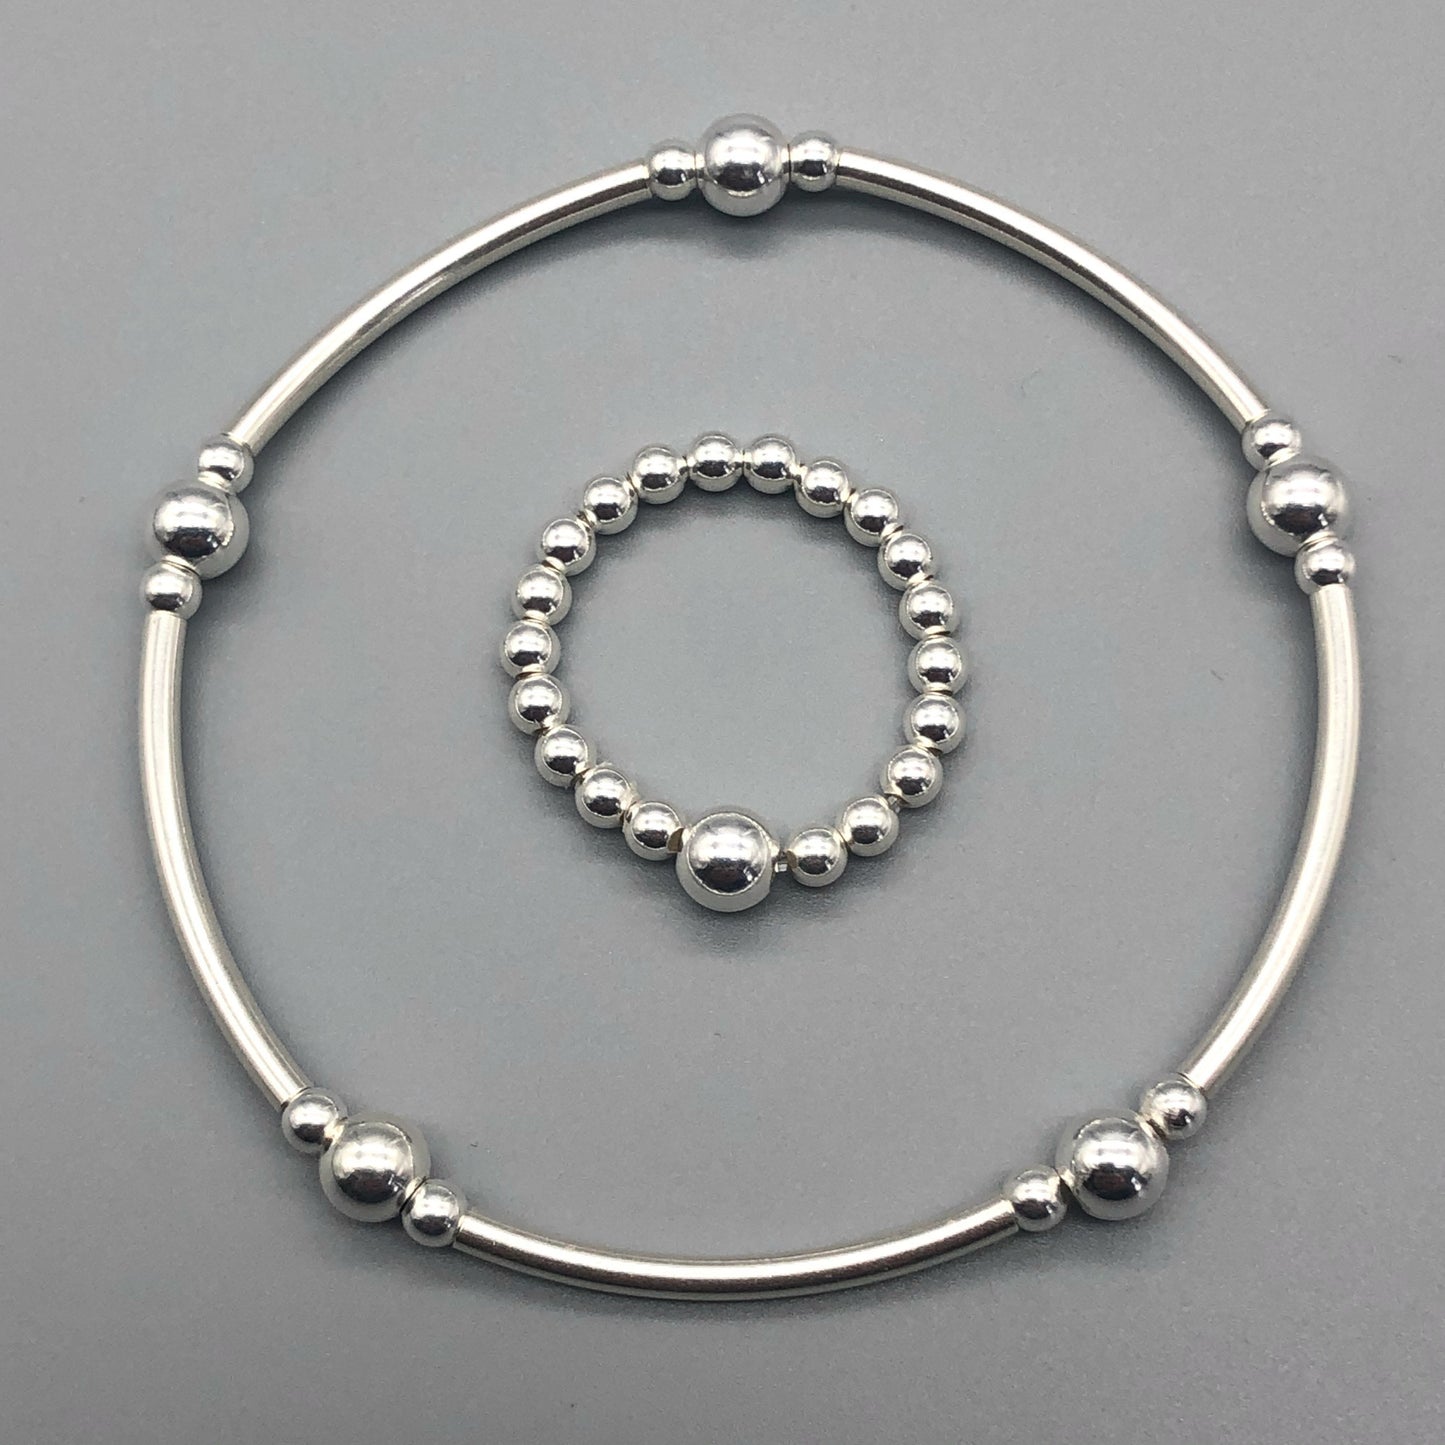 Stack filler sterling silver women's bracelet and ring set by My Silver Wish